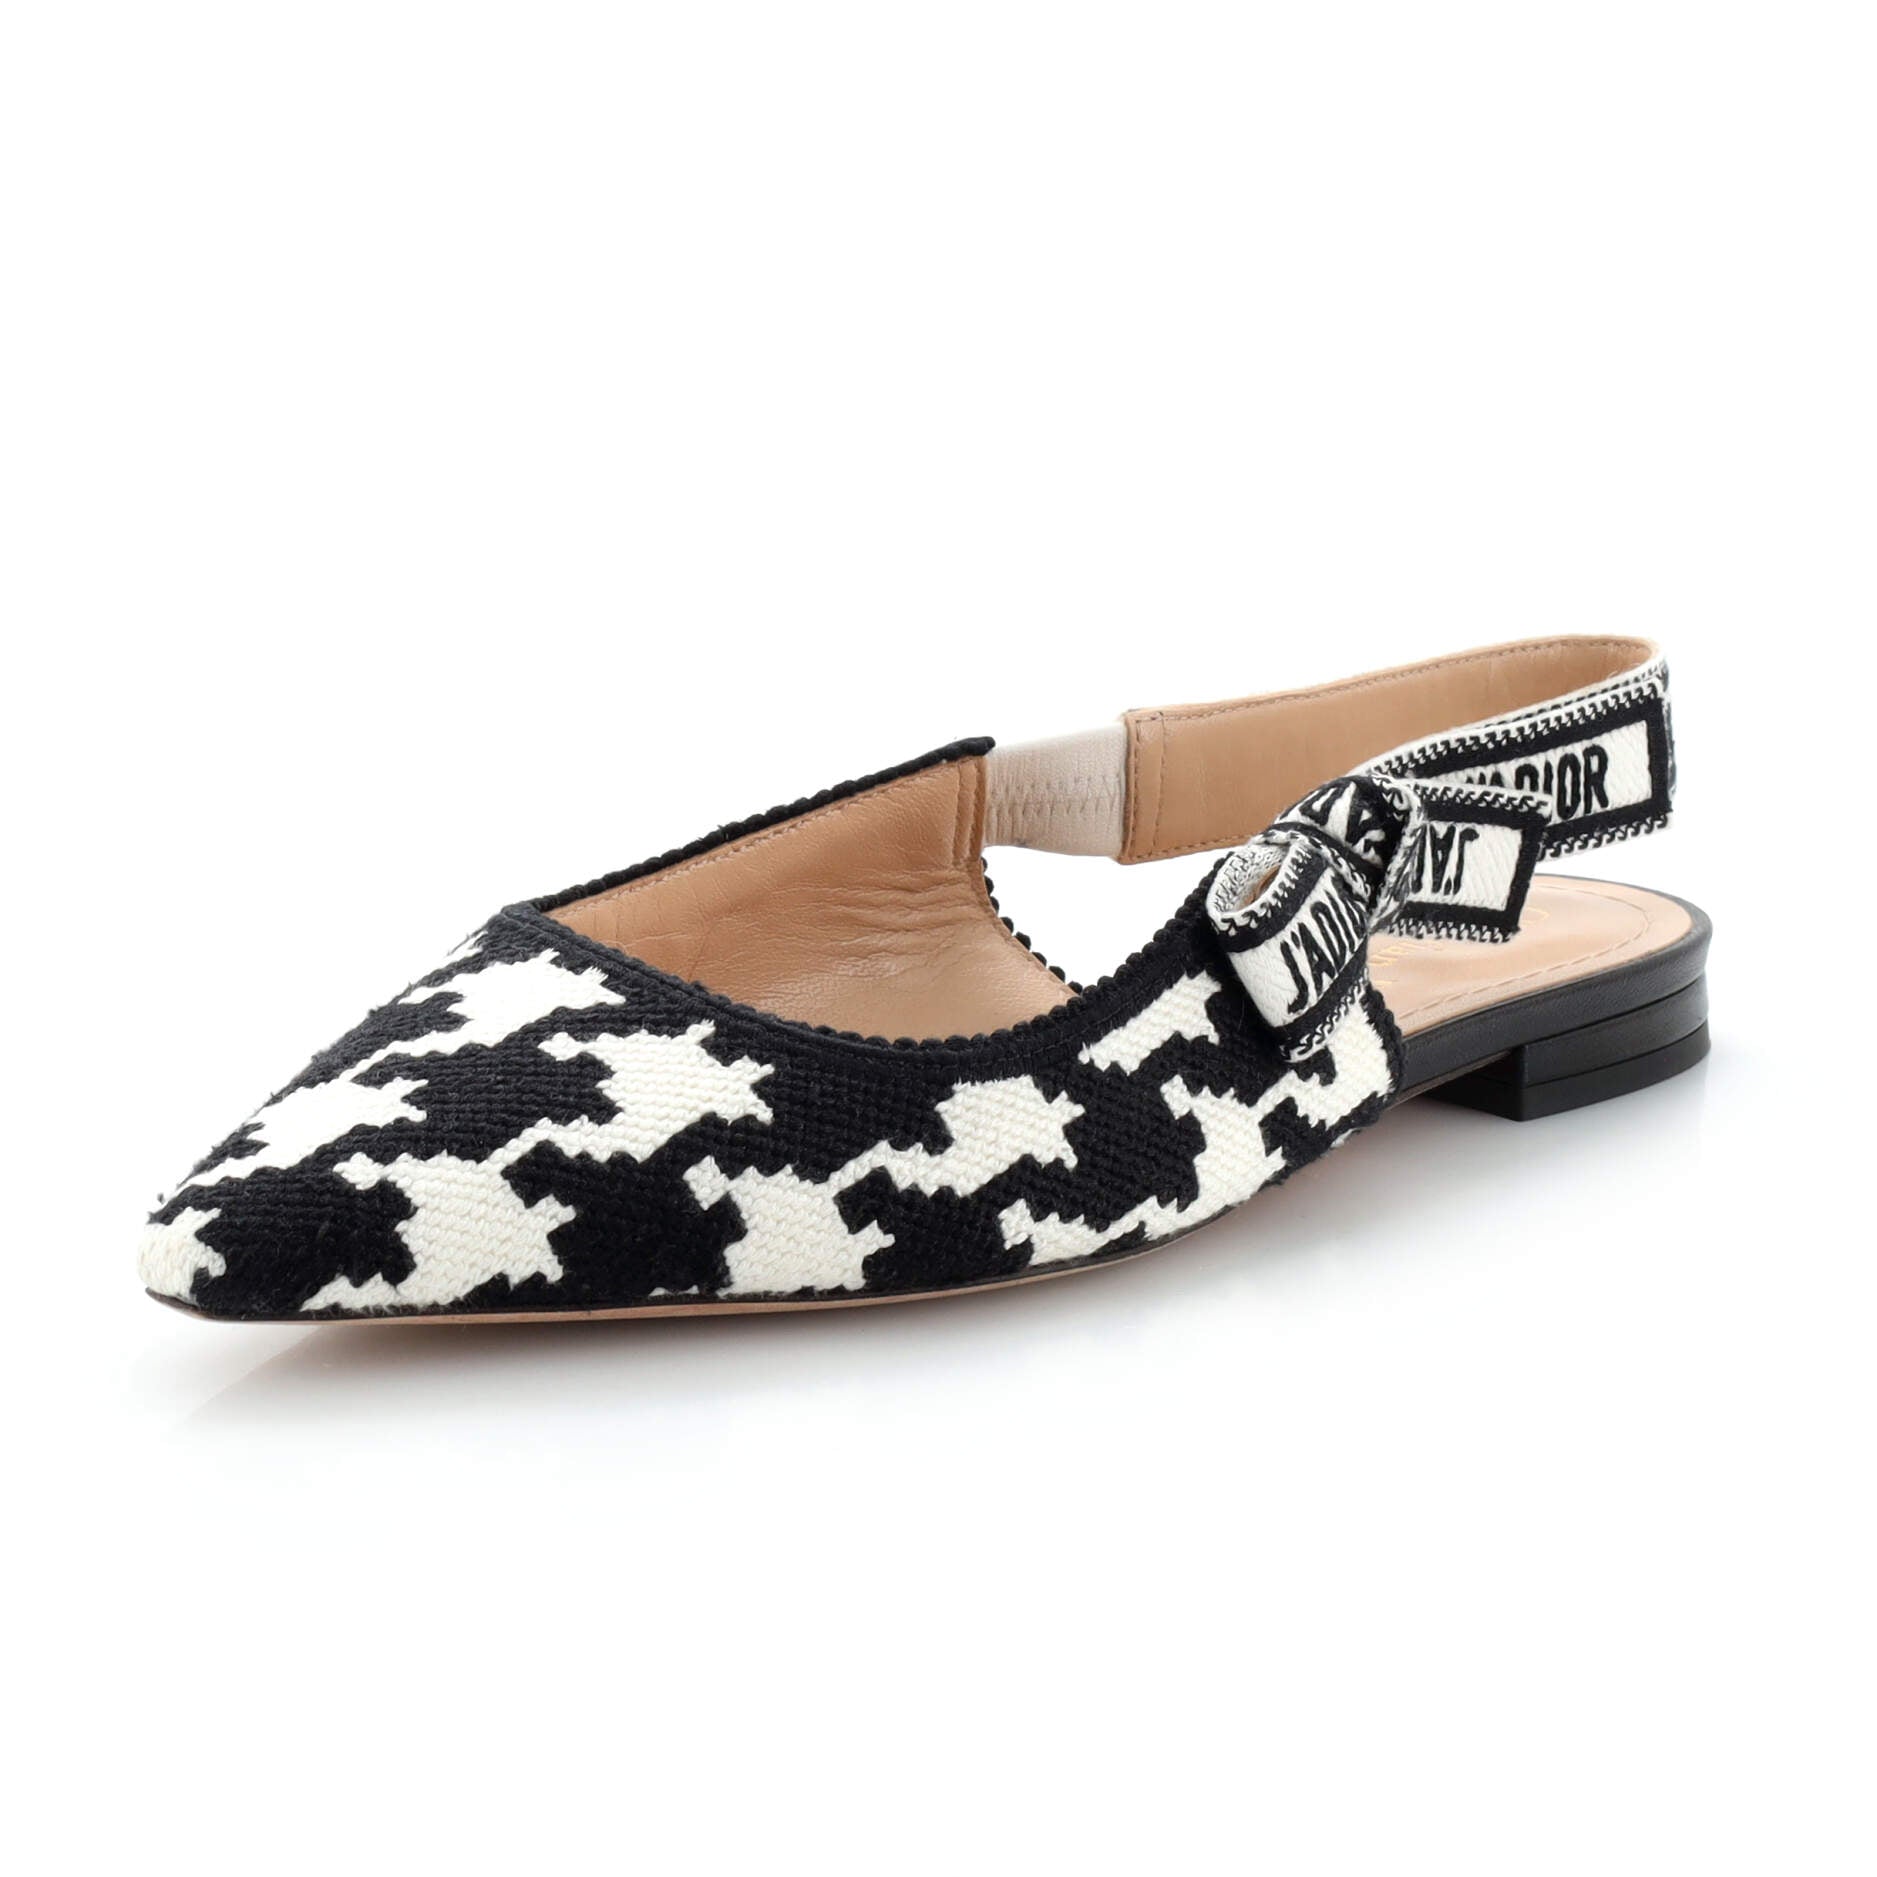 Women's J'adior Slingback Flats Houndstooth Embroidered Cotton